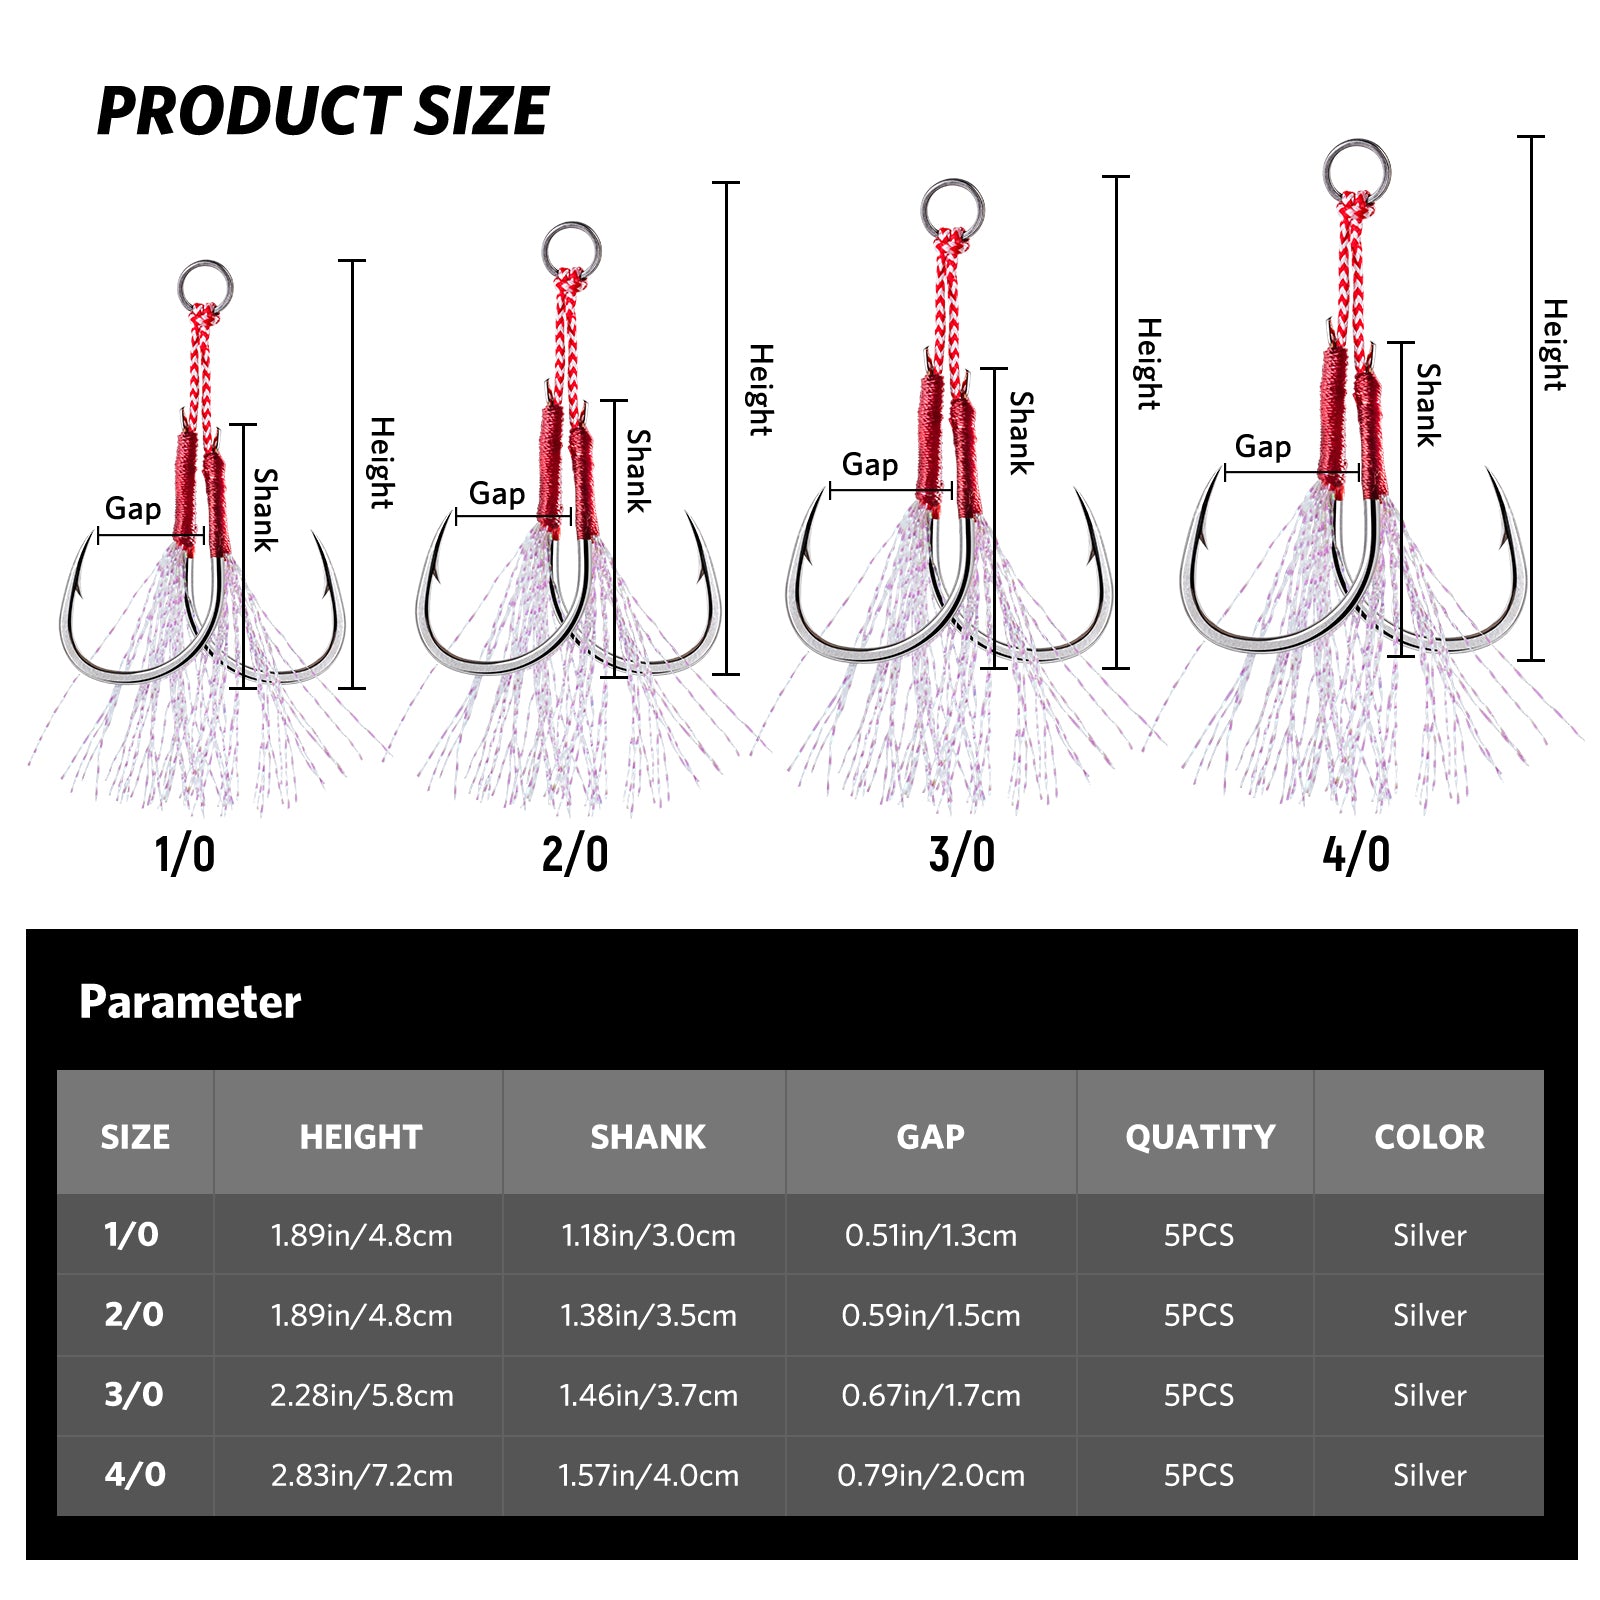 Predator Pro Saltwater Jig Set: Corrosion-Resistant Lures with